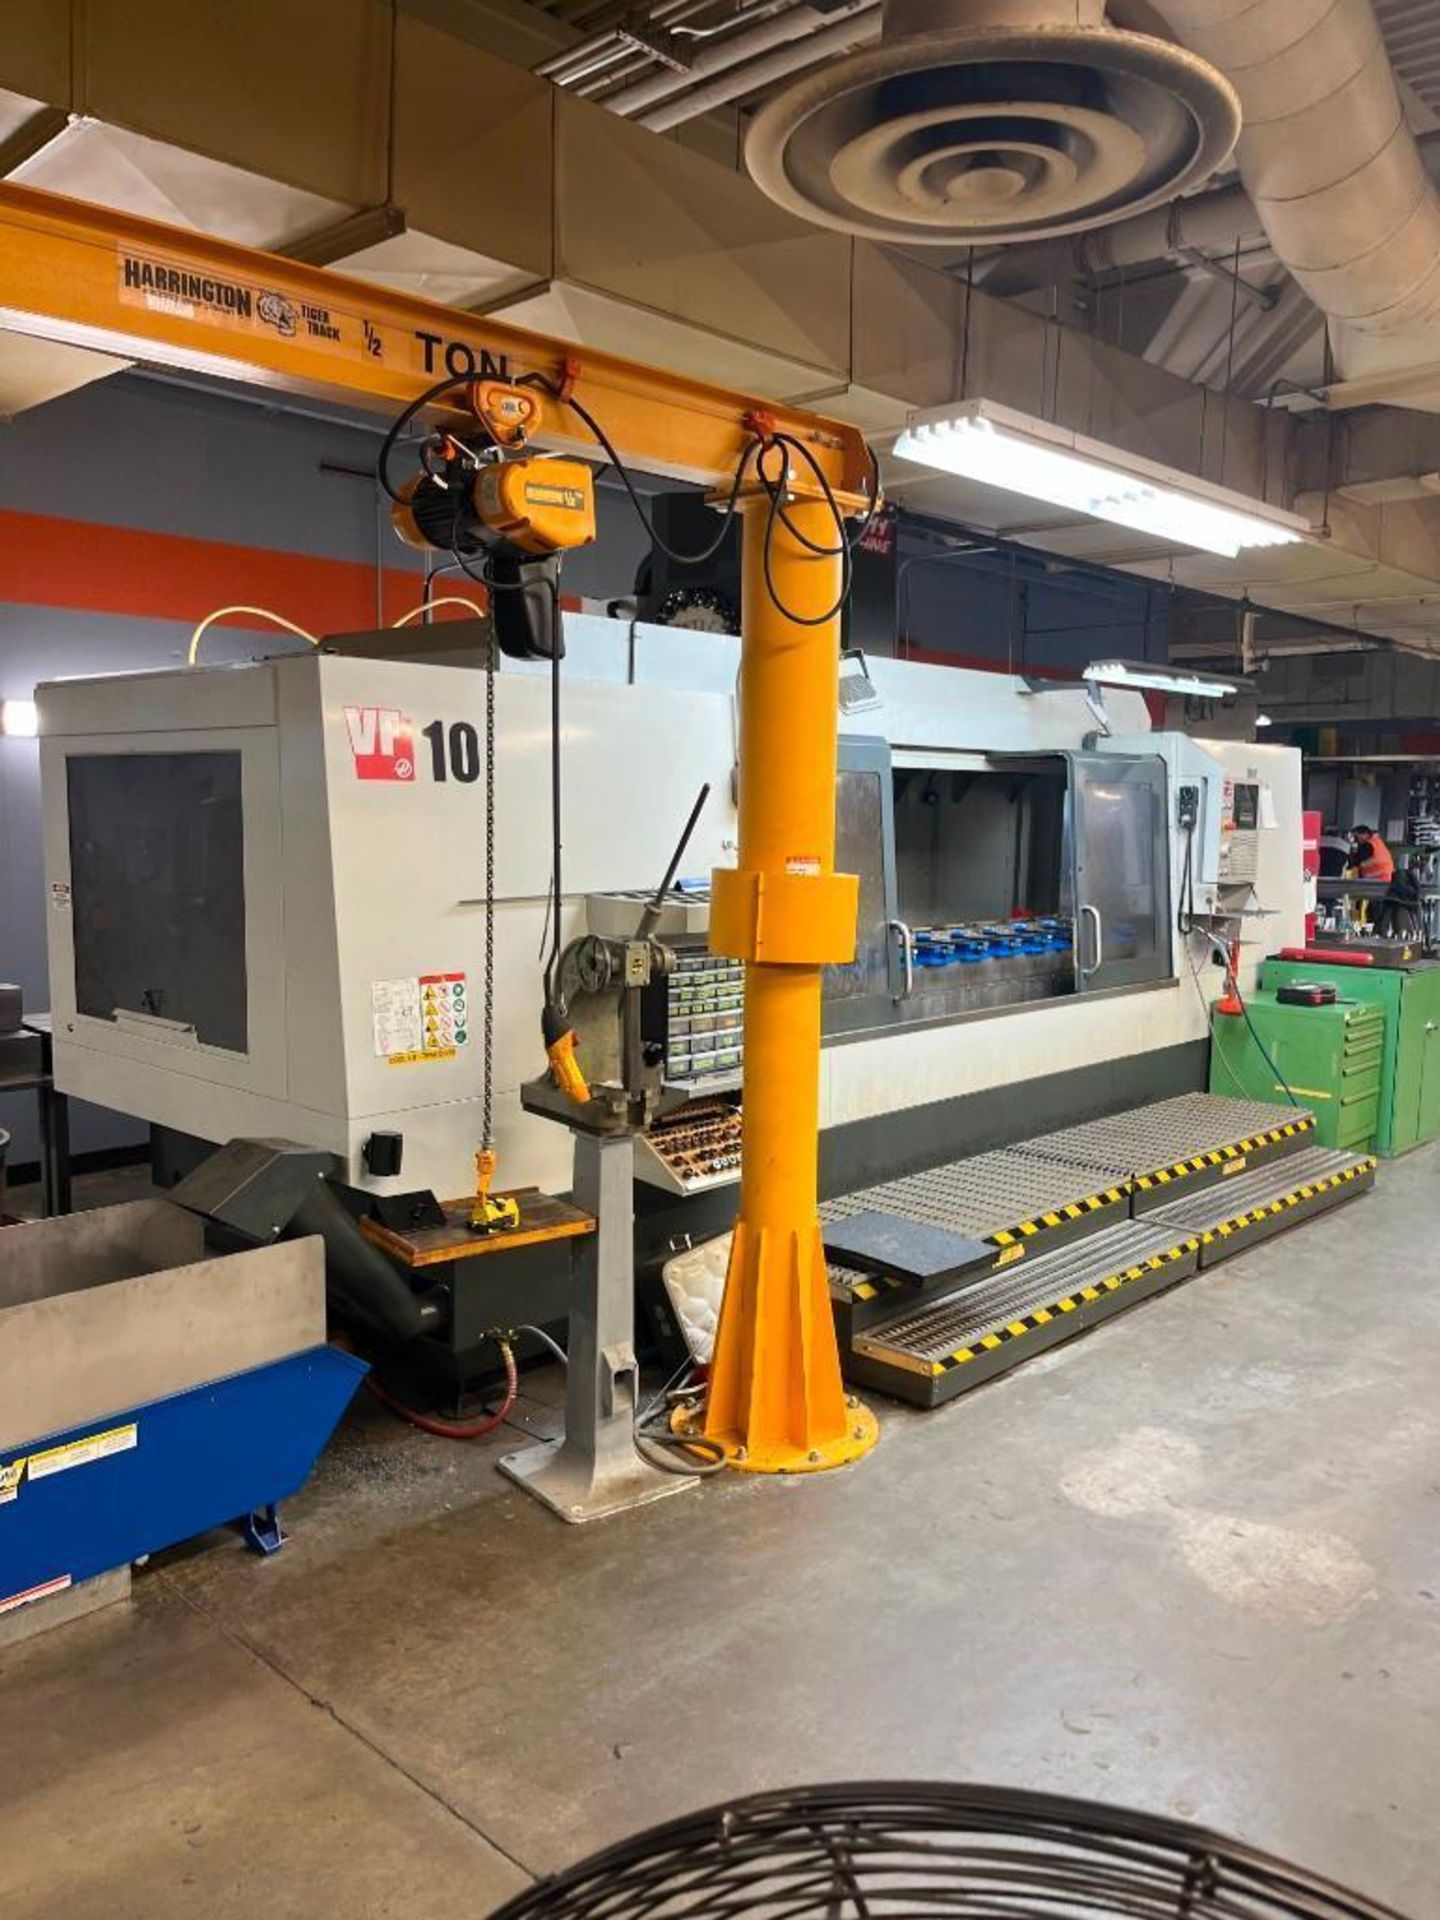 Haas Model VF-10/40 CNC Vertical Machining Center (2019) - Image 16 of 17